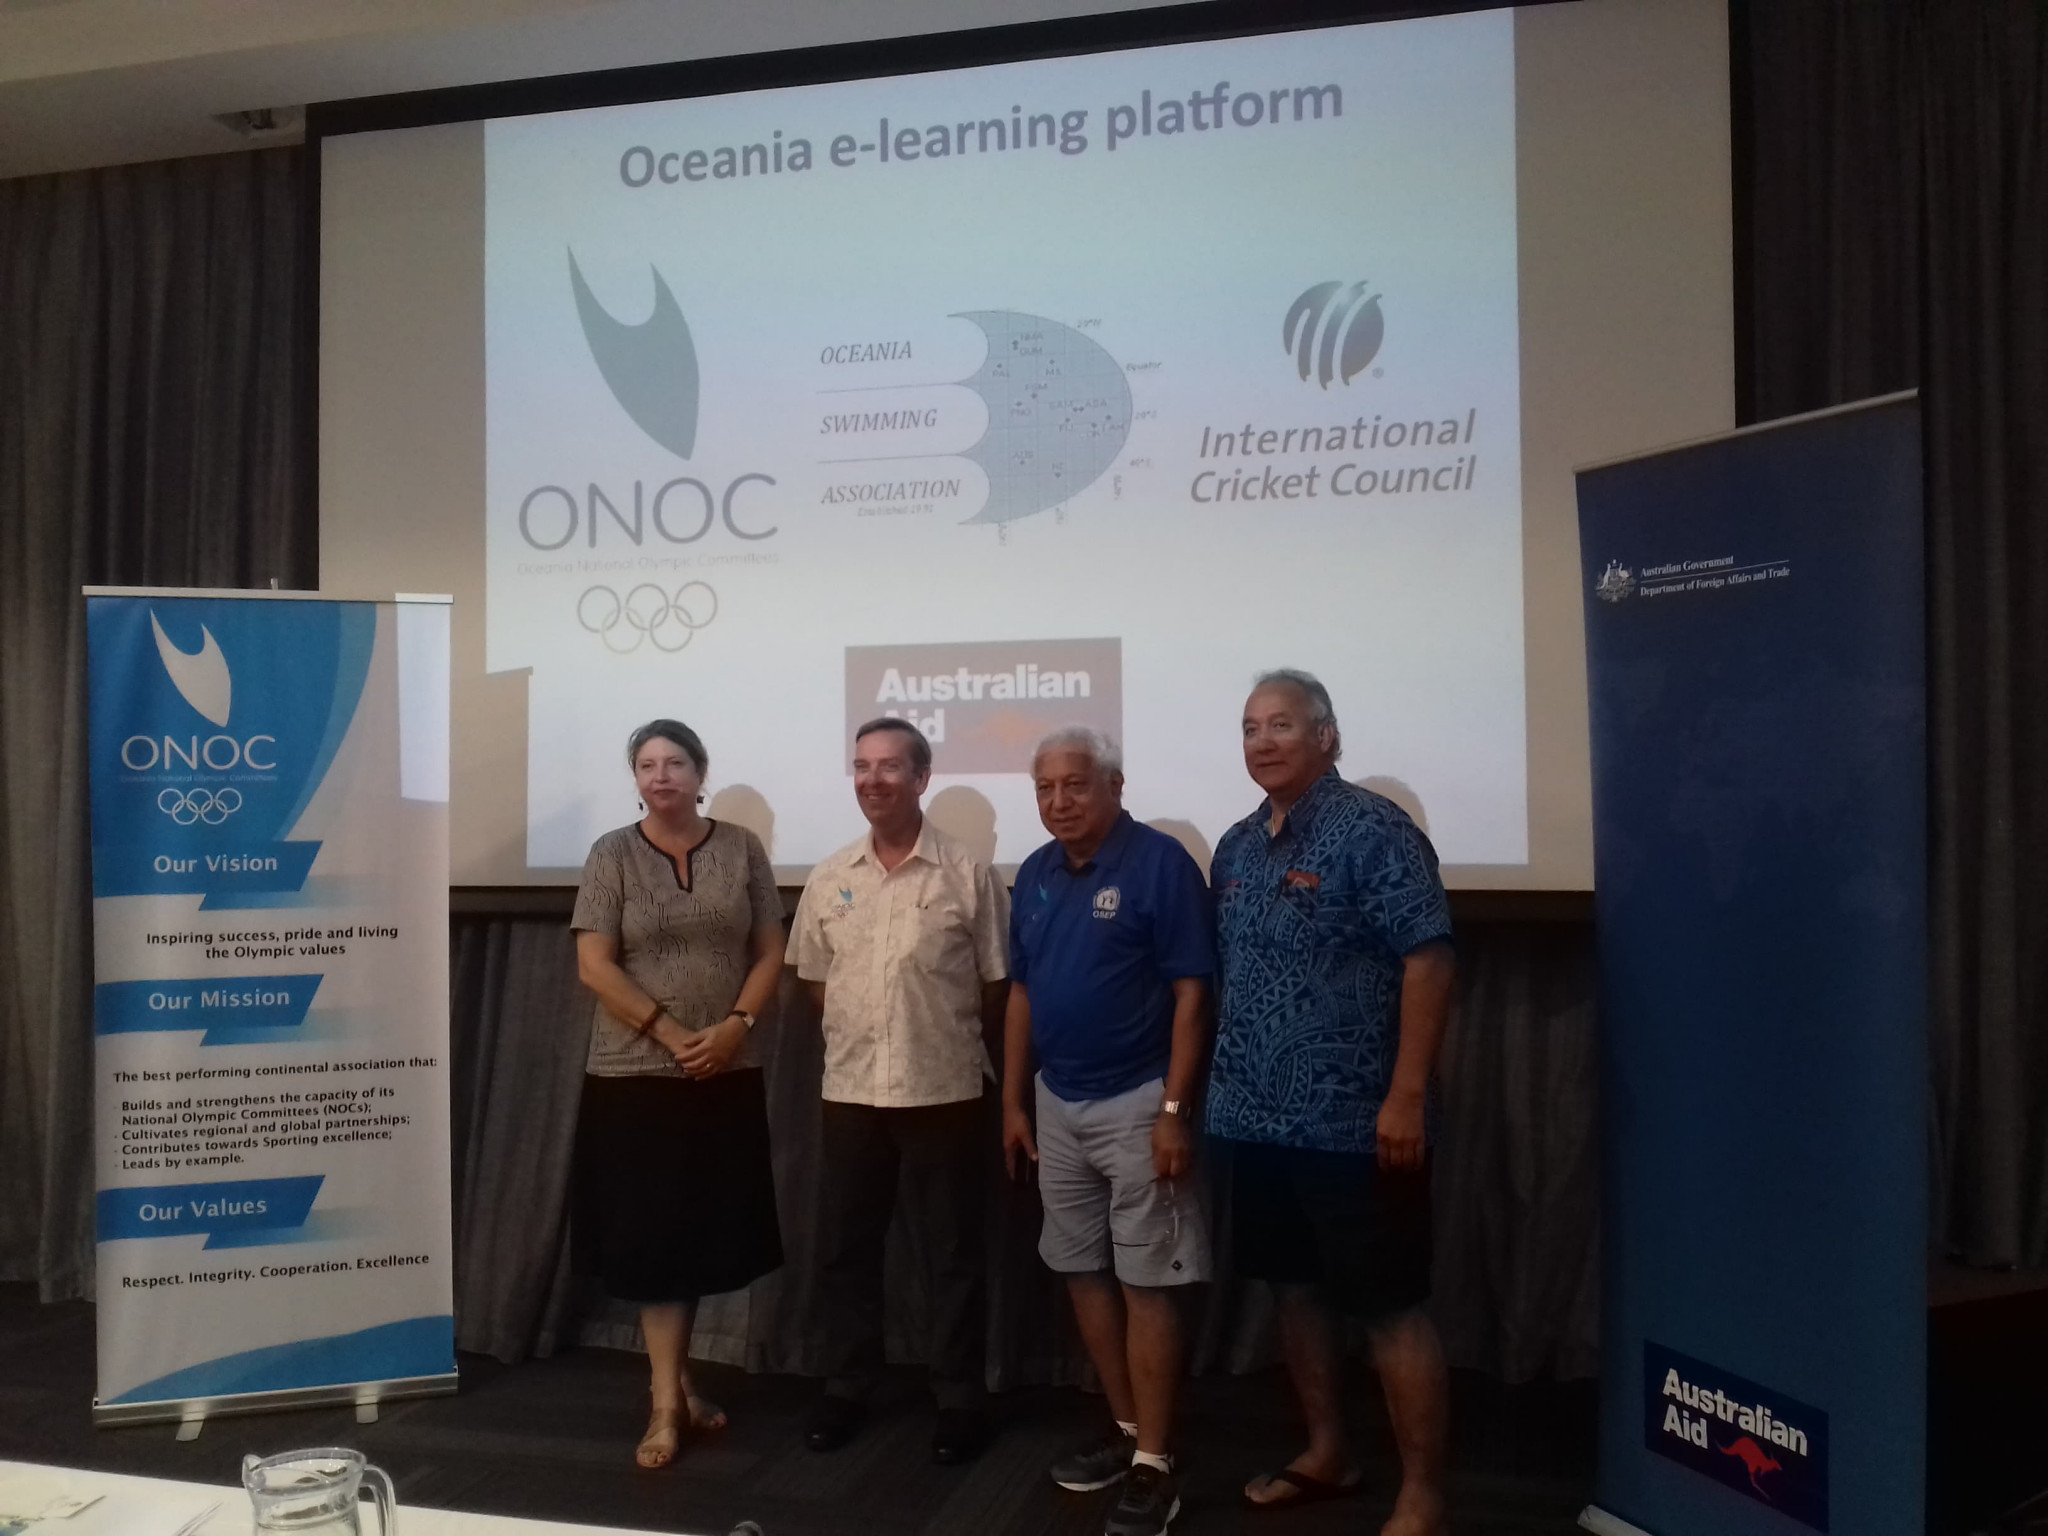 Oceania e-learning platform to launch to boost training and education of sport administrators